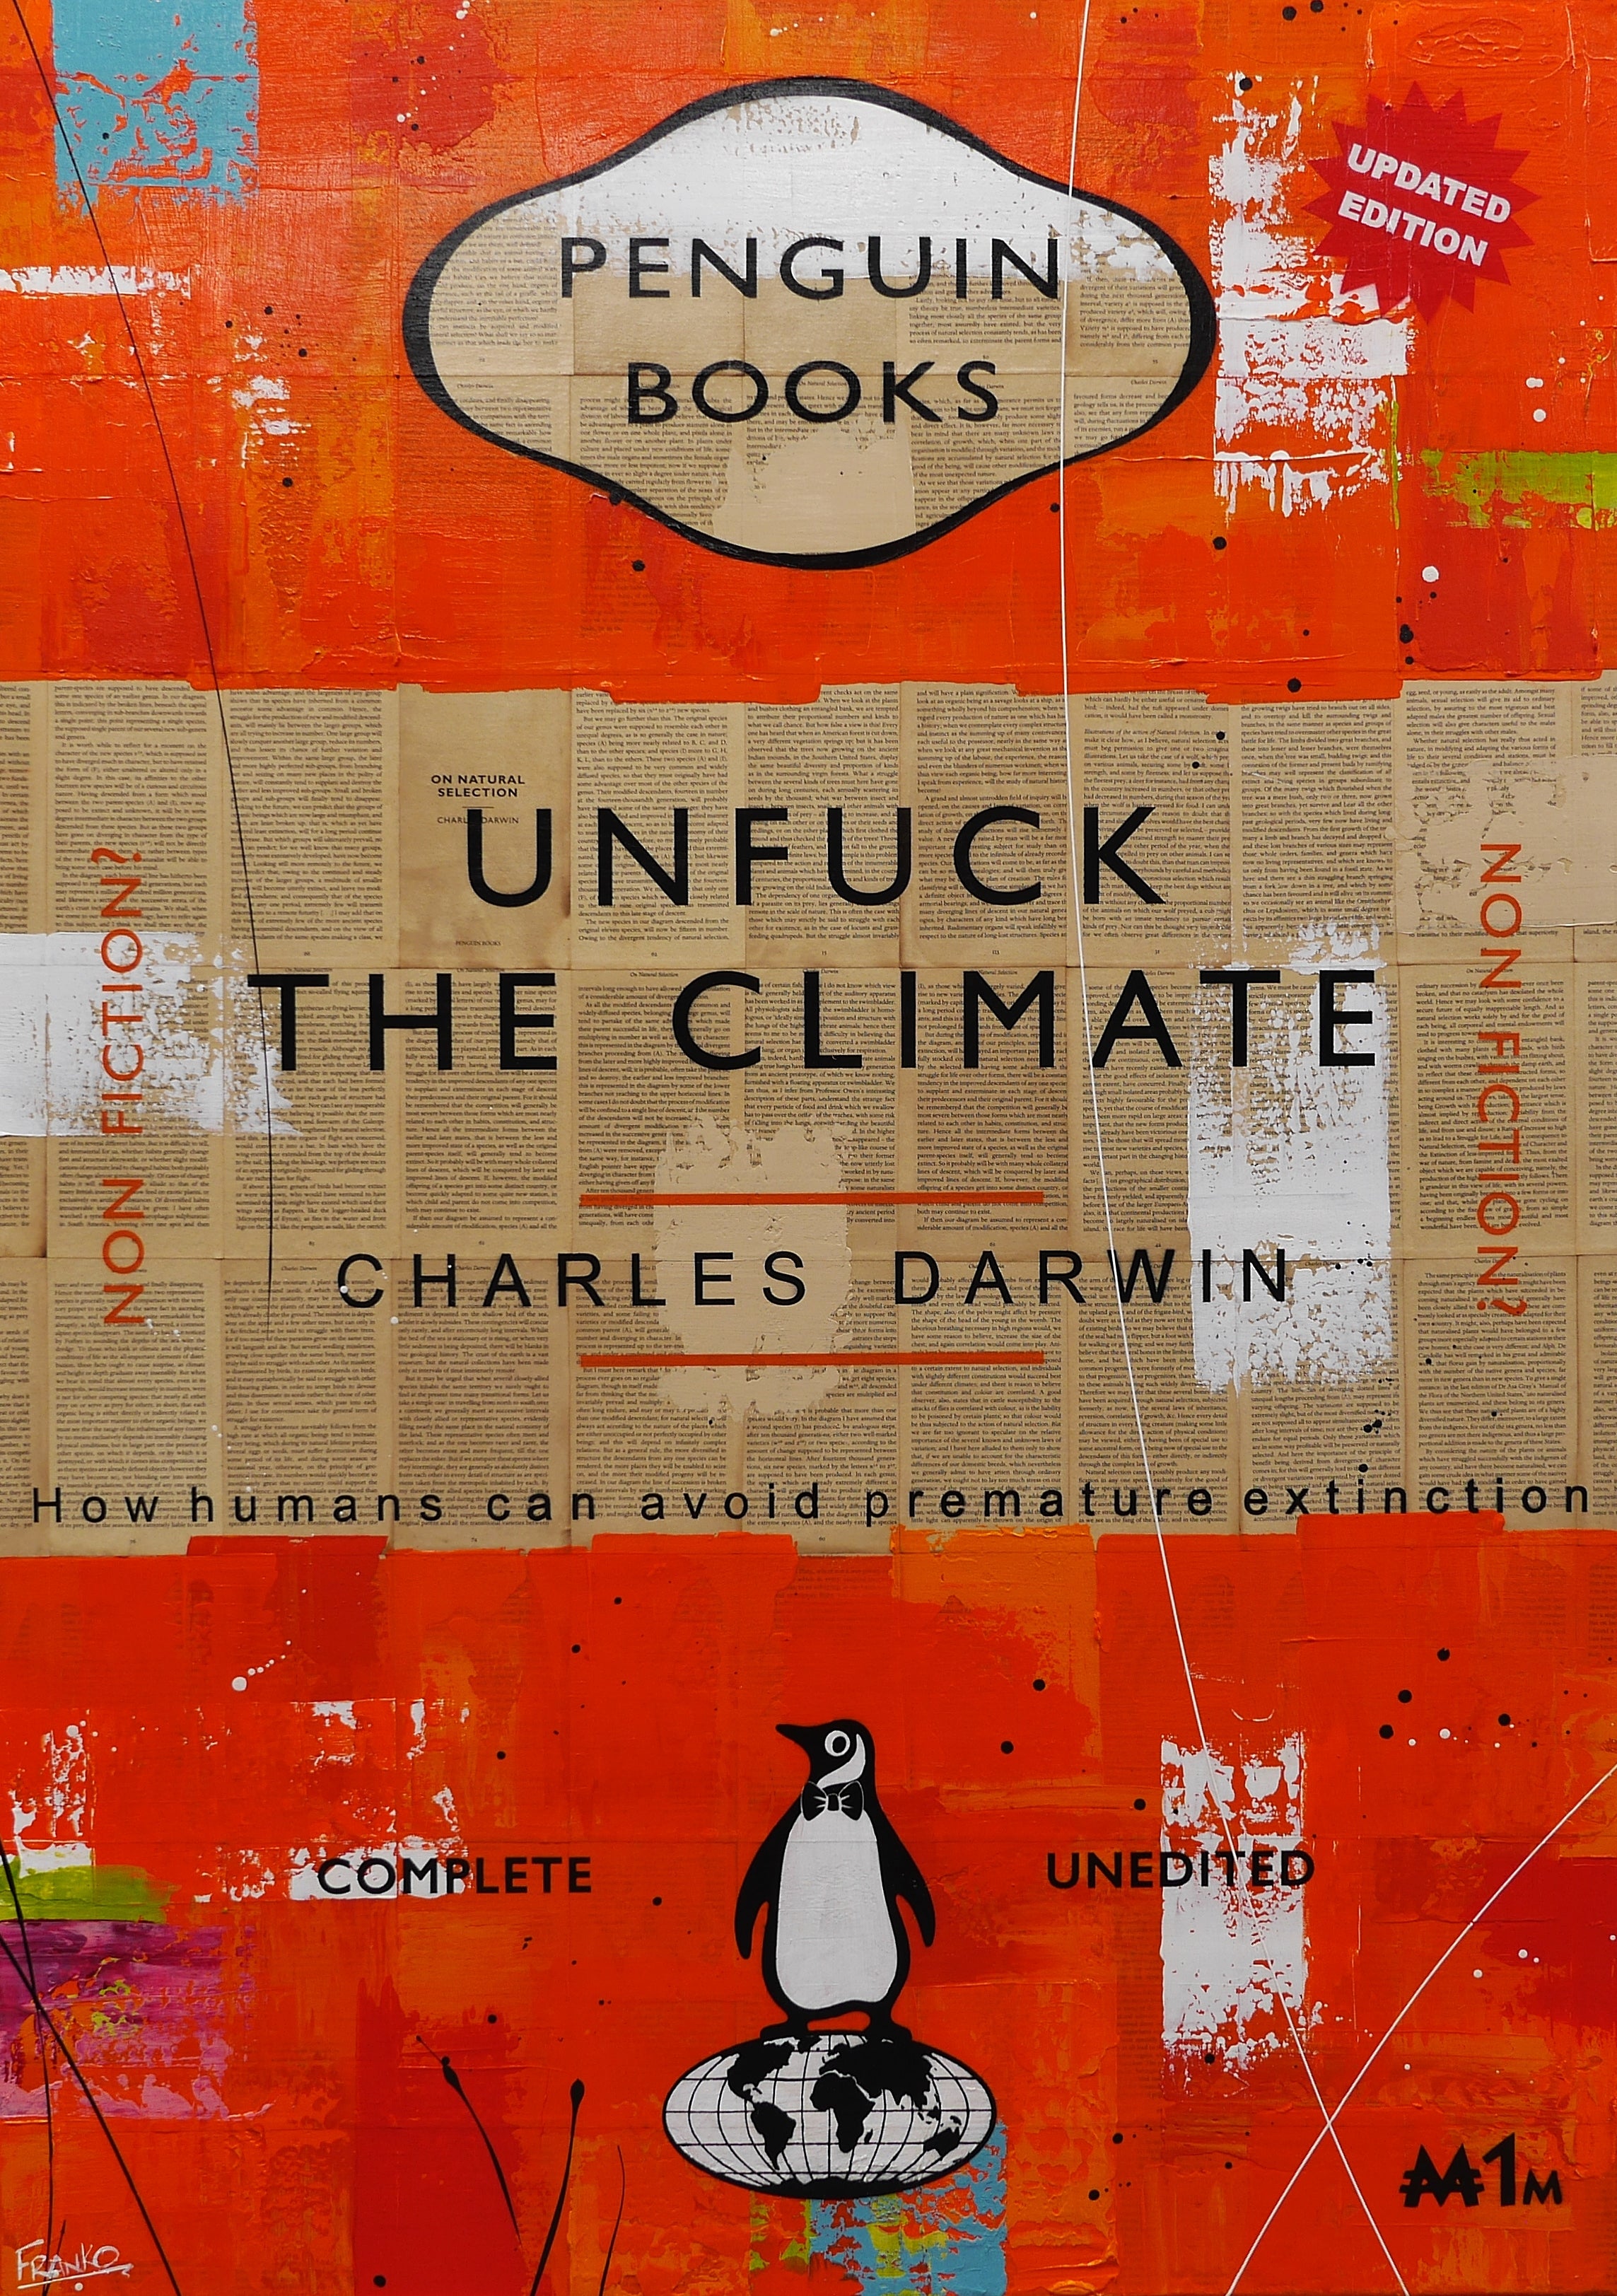 The Changing Climate 140cm x 100cm Urban Pop Book Club Painting (SOLD)